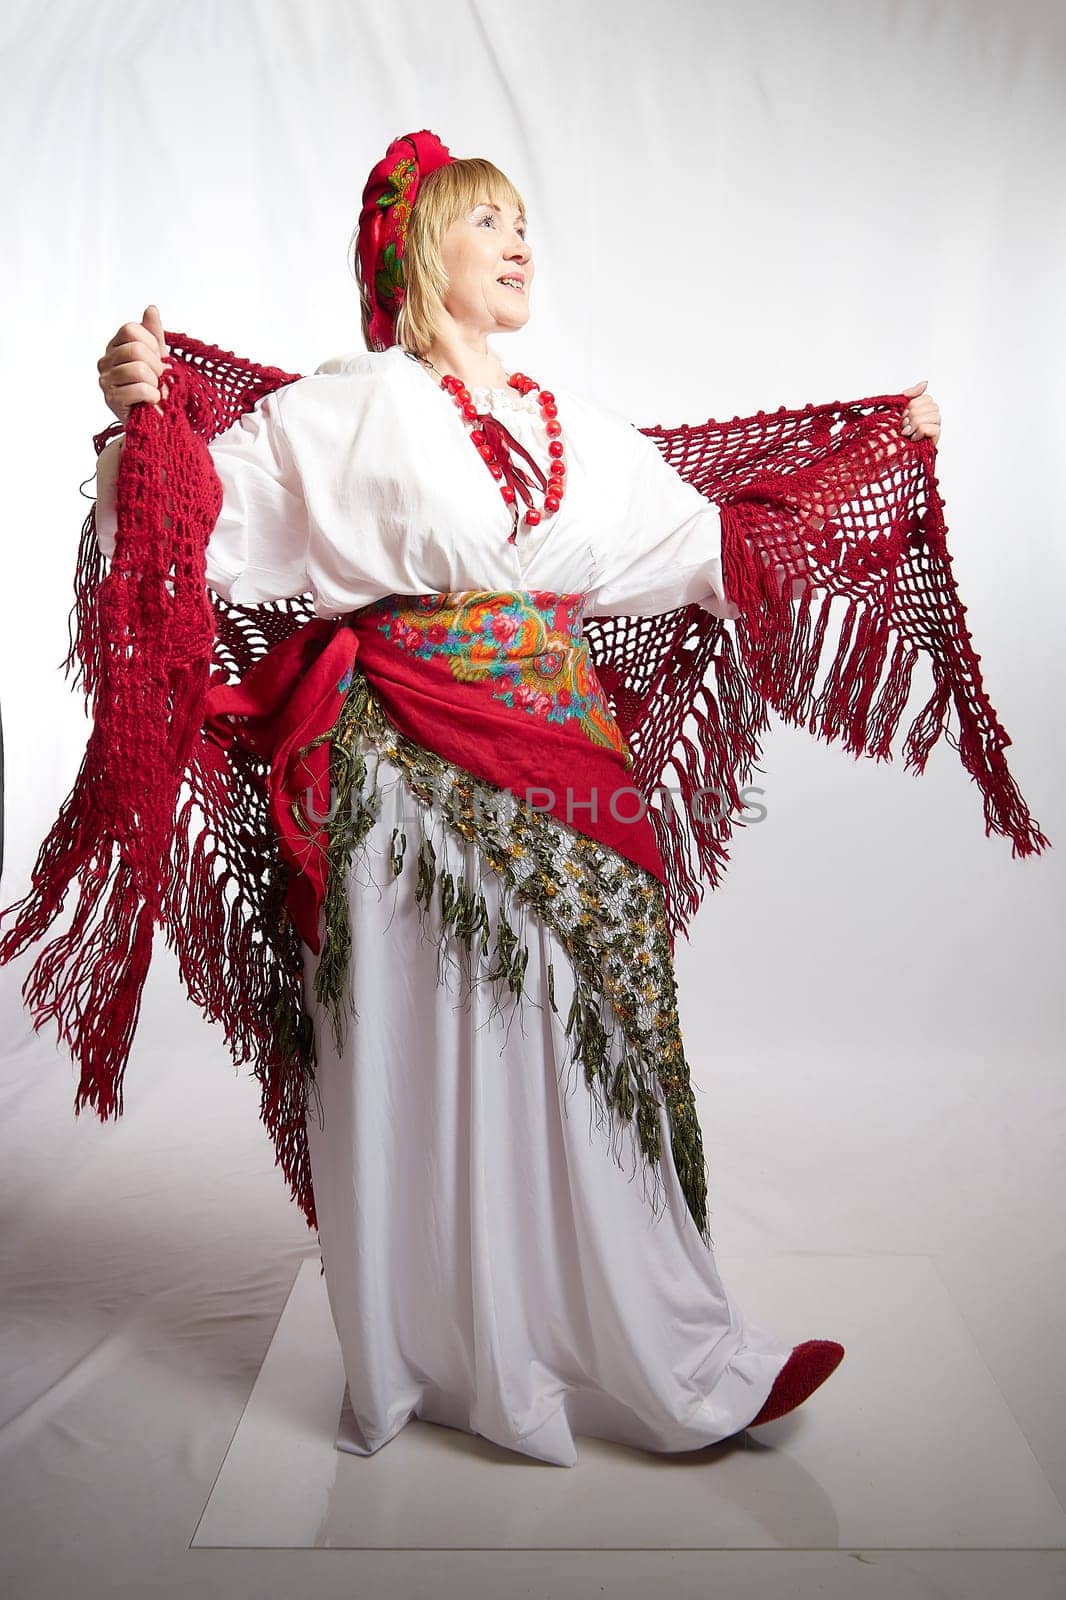 Cheerful funny adult mature woman solokha in a red knitted shawl. Female model in clothes of national ethnic Slavic style. Stylized Ukrainian, Belarusian or Russian woman poses in a comic photo shoot by keleny